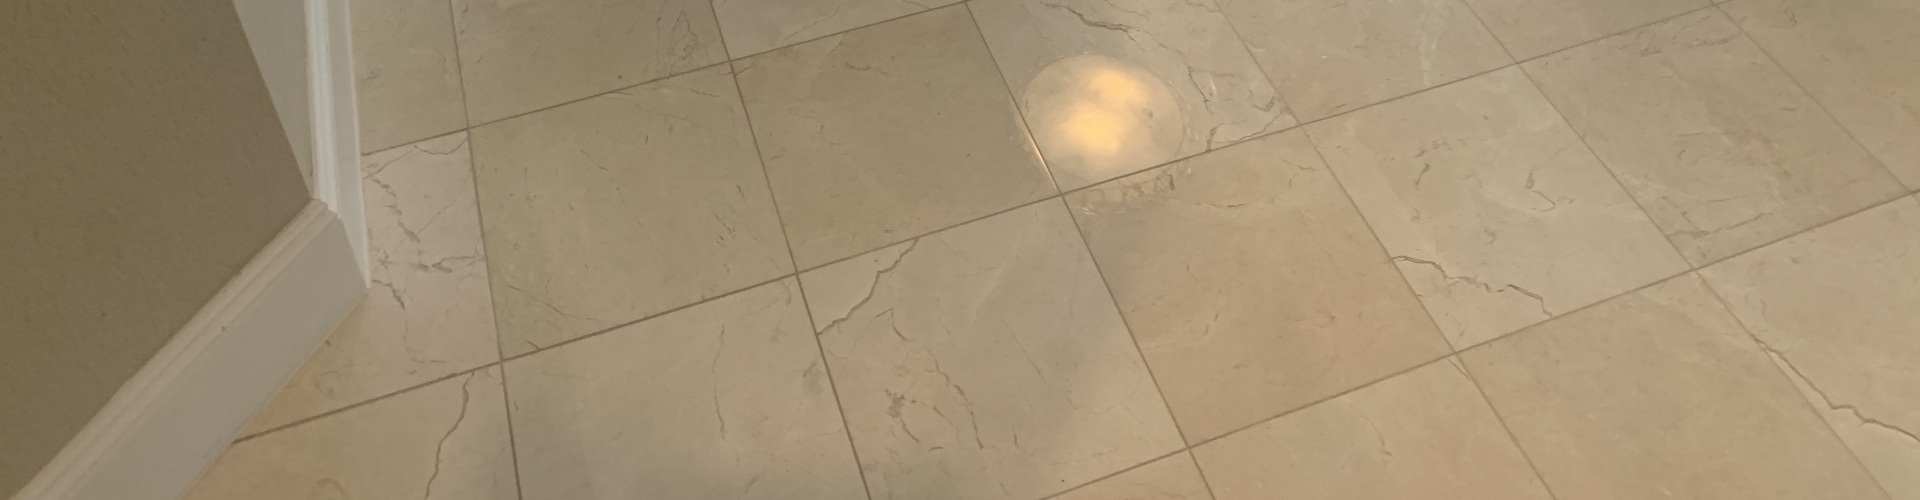 How to Repair Travertine Floors: A Step-by-Step Guide